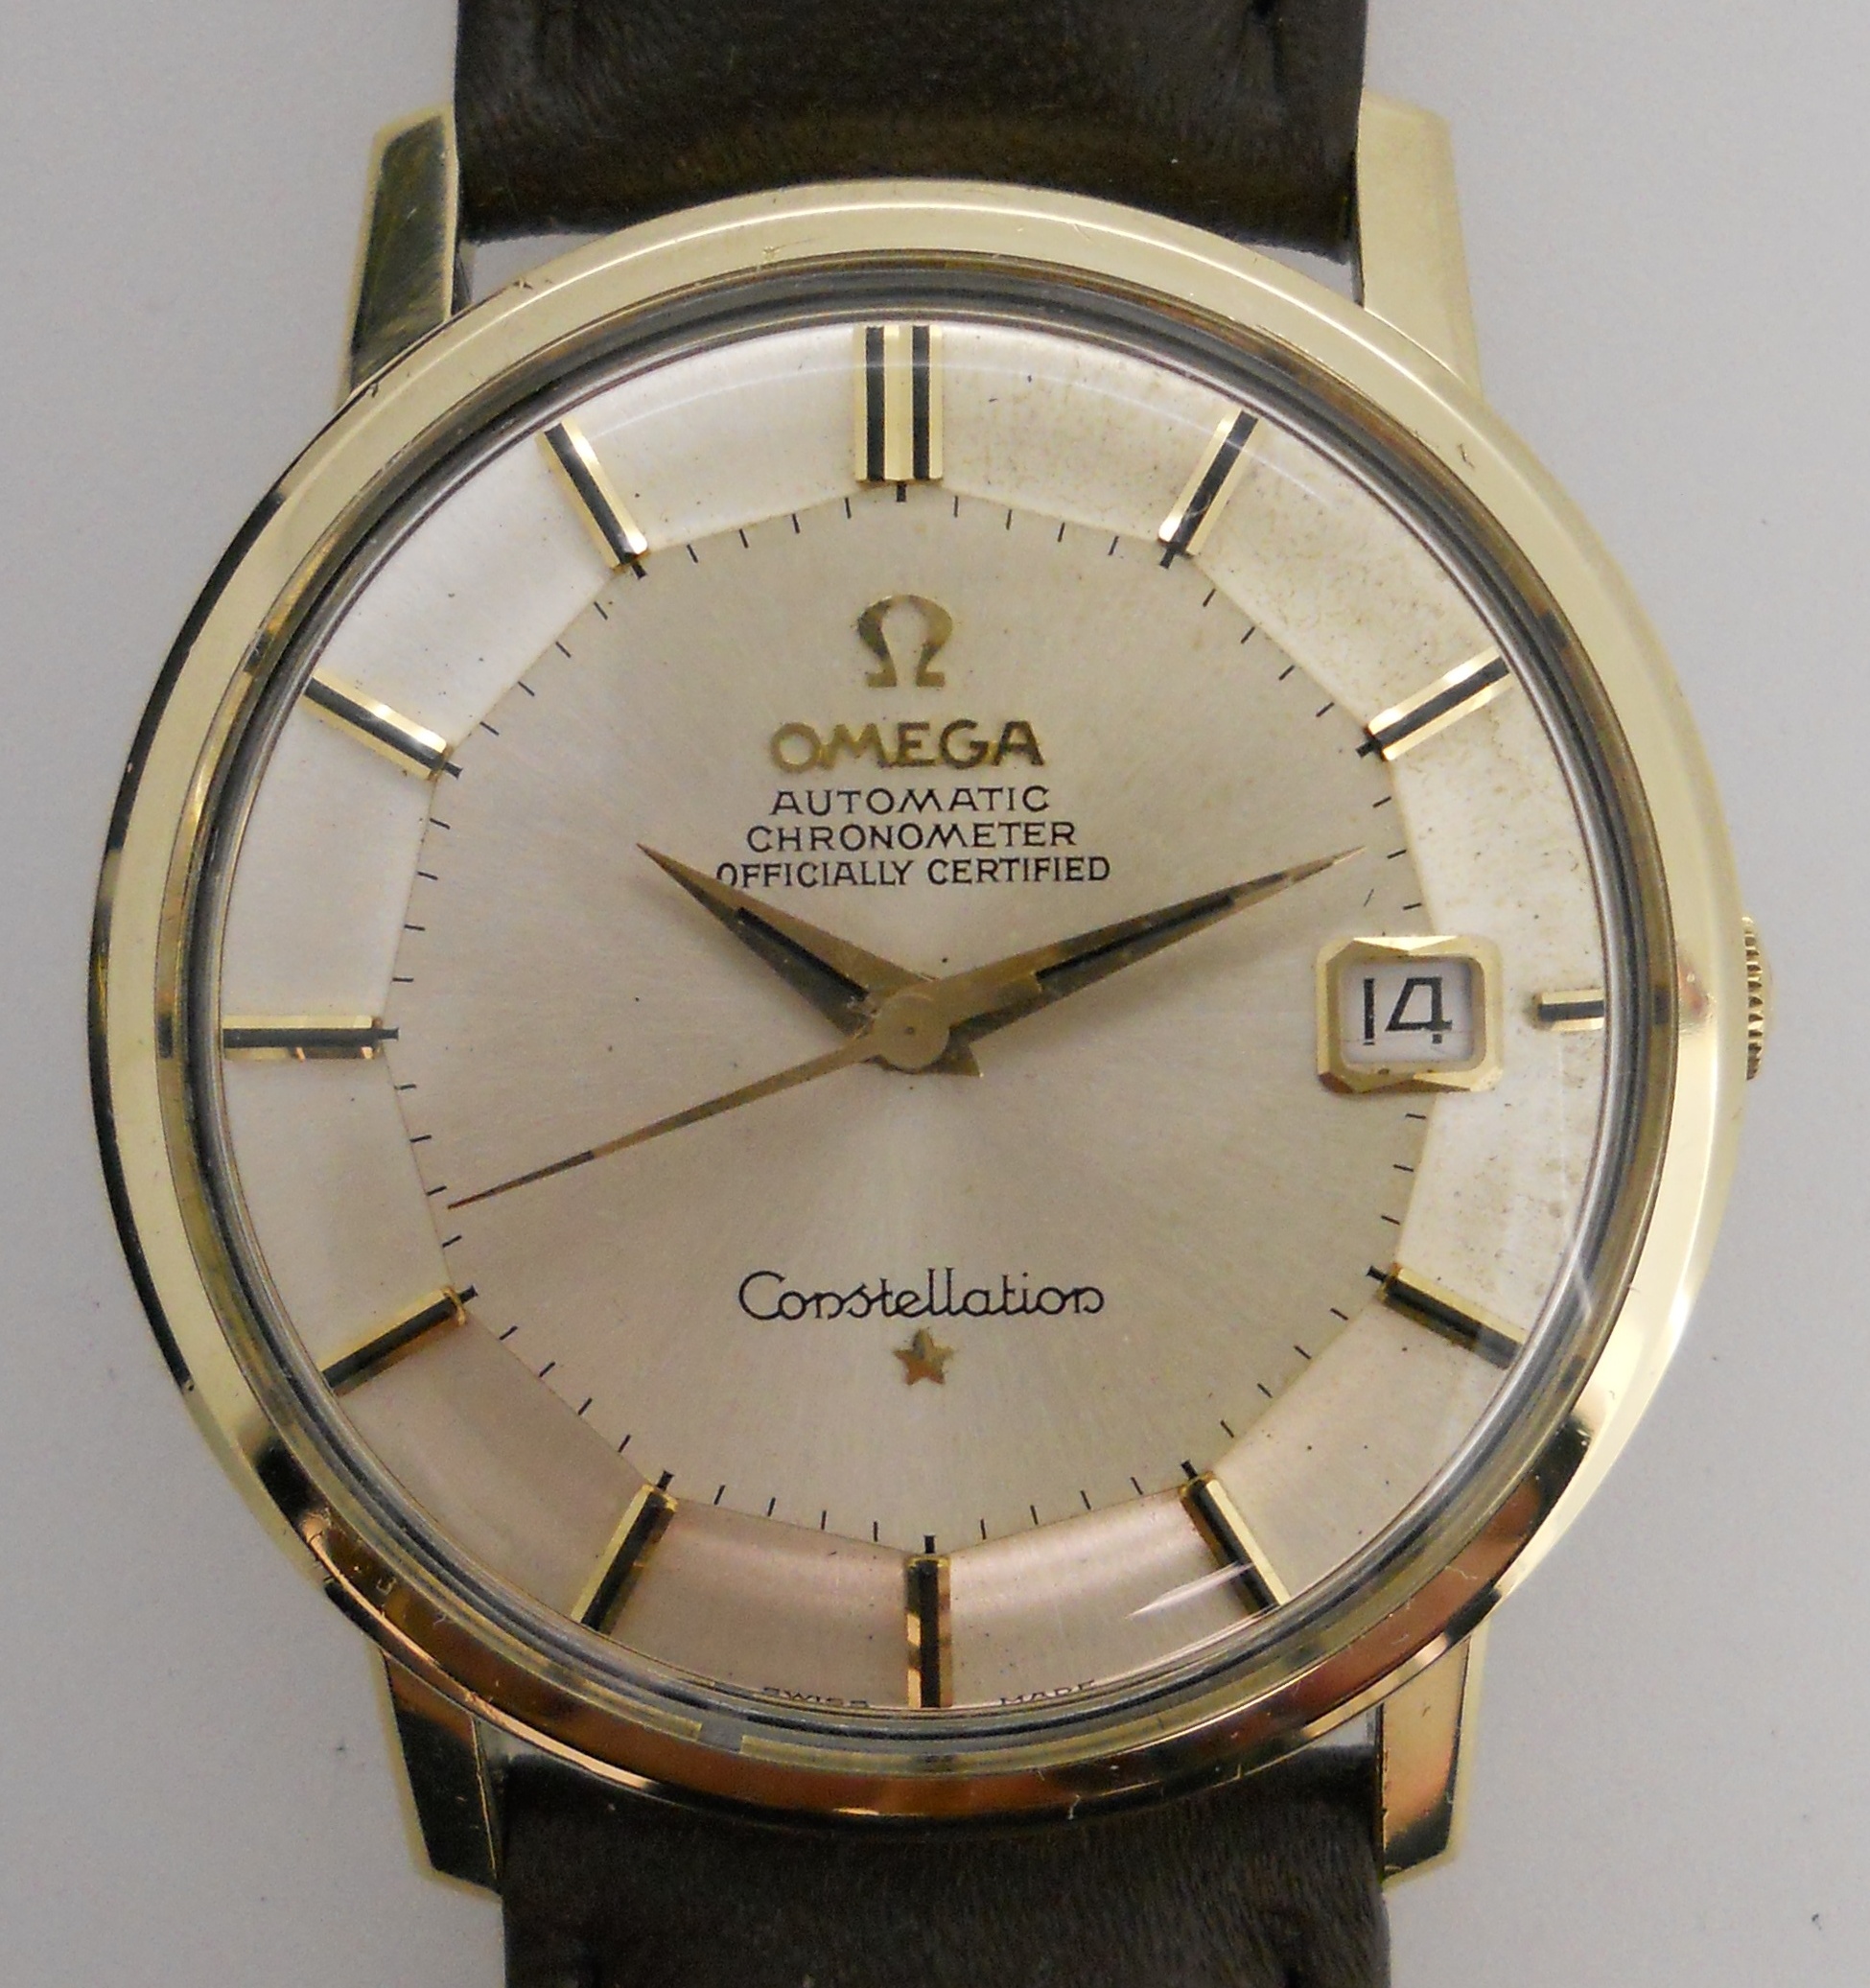 Omega Constellation 1966 | robswatches